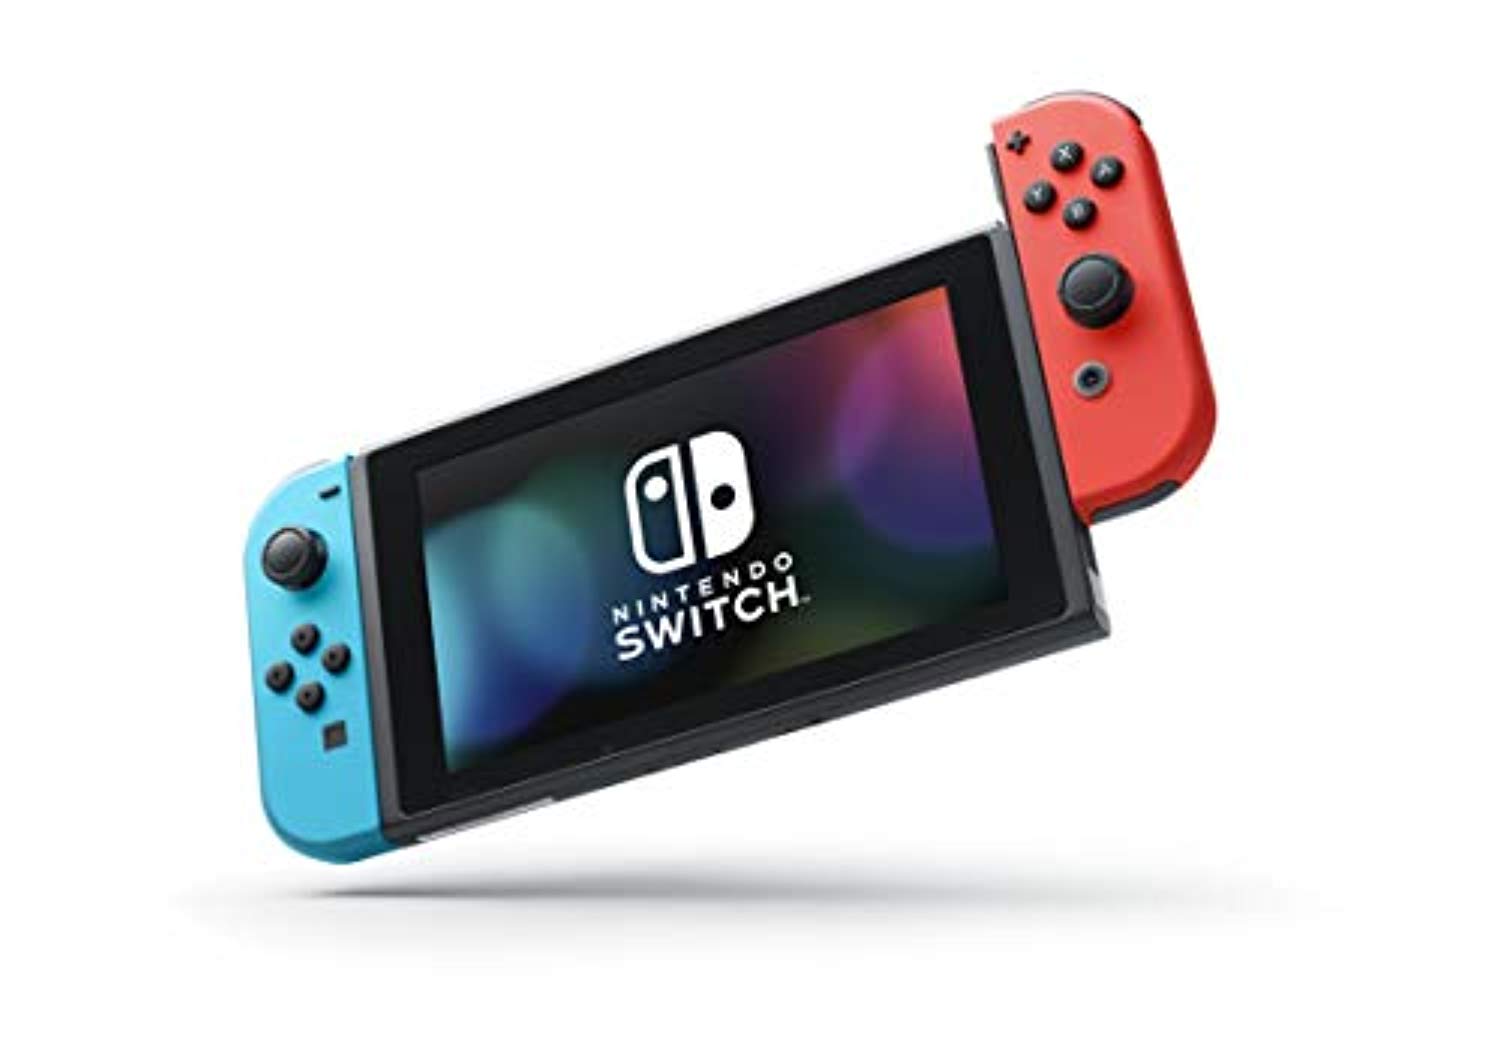 Nintendo Switch (Neon Red/Neon Blue) with Mario Kart 8 Deluxe - Offer Games